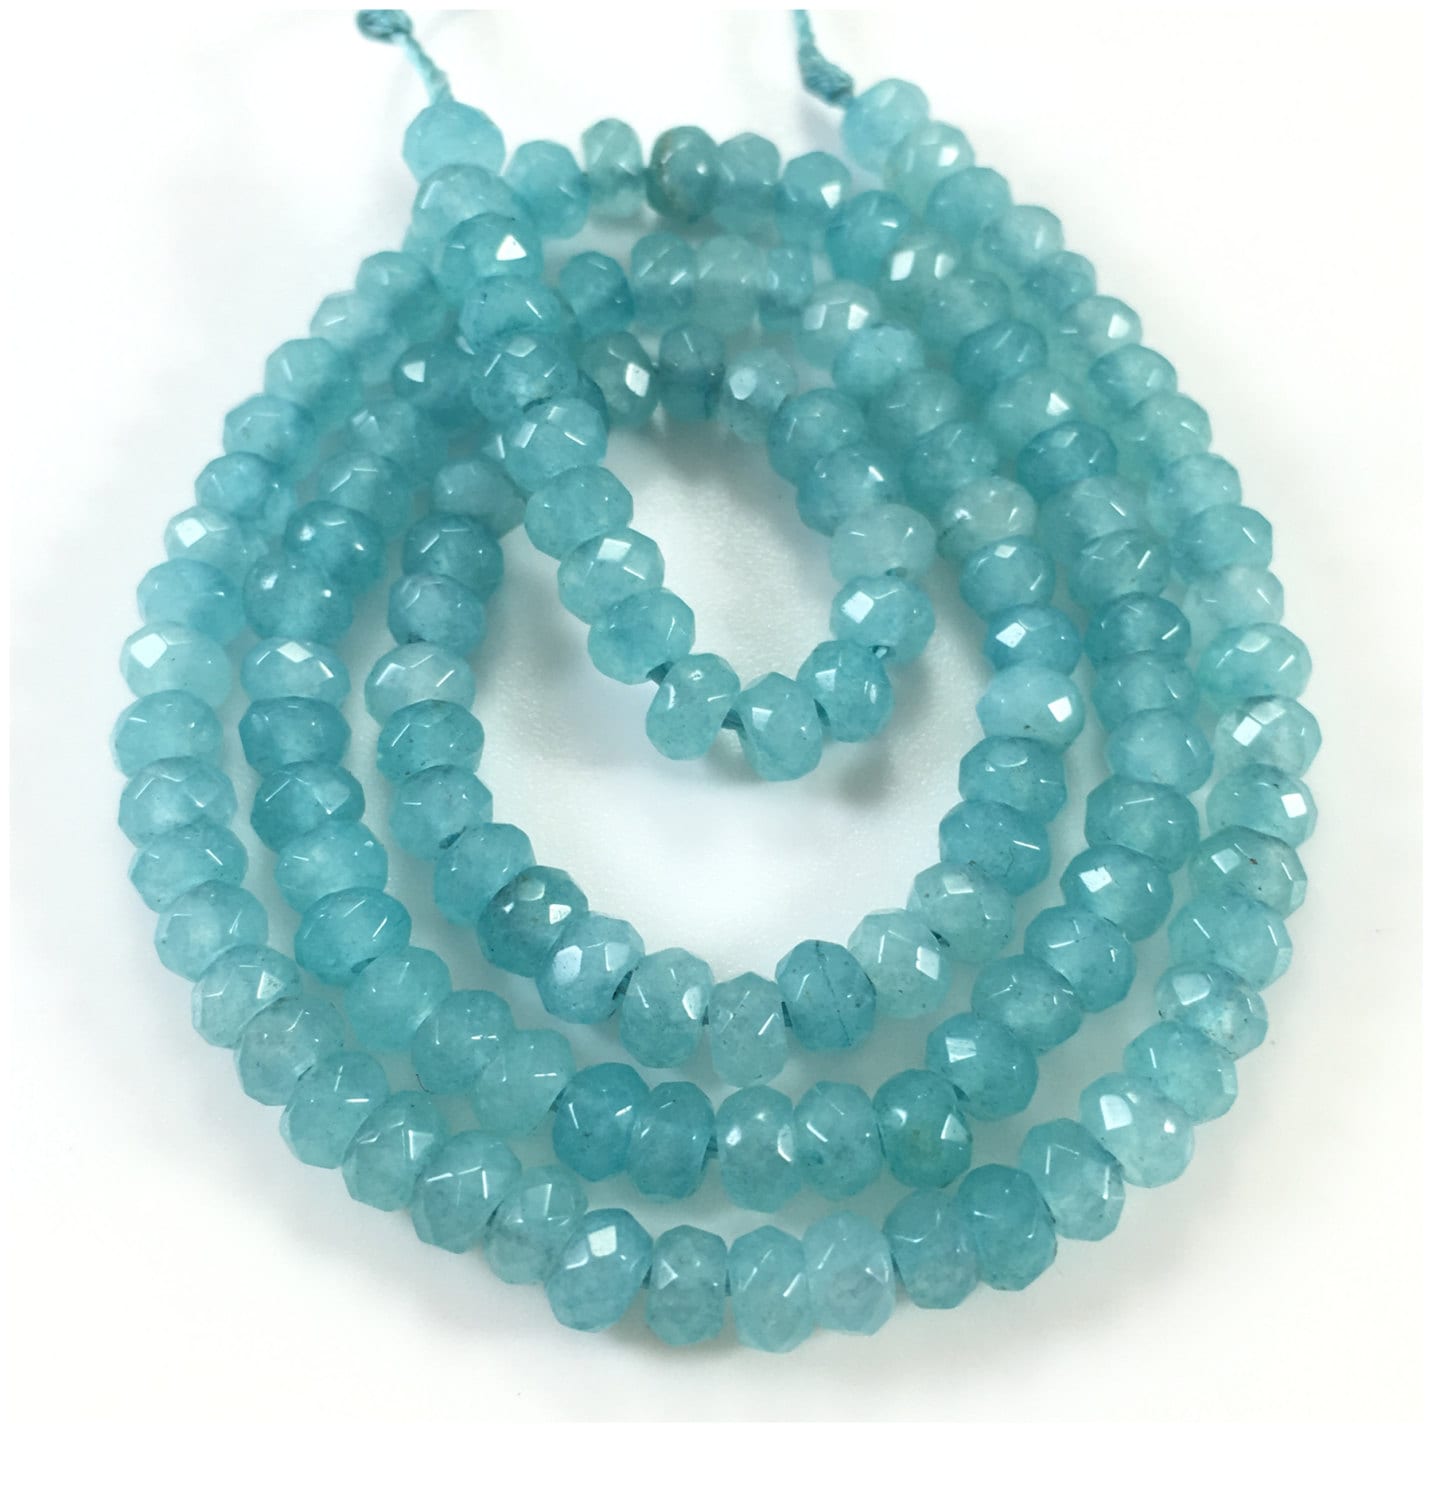 43mm Faceted Blue Jade Beads Gemstone Beads Wholesale Beads